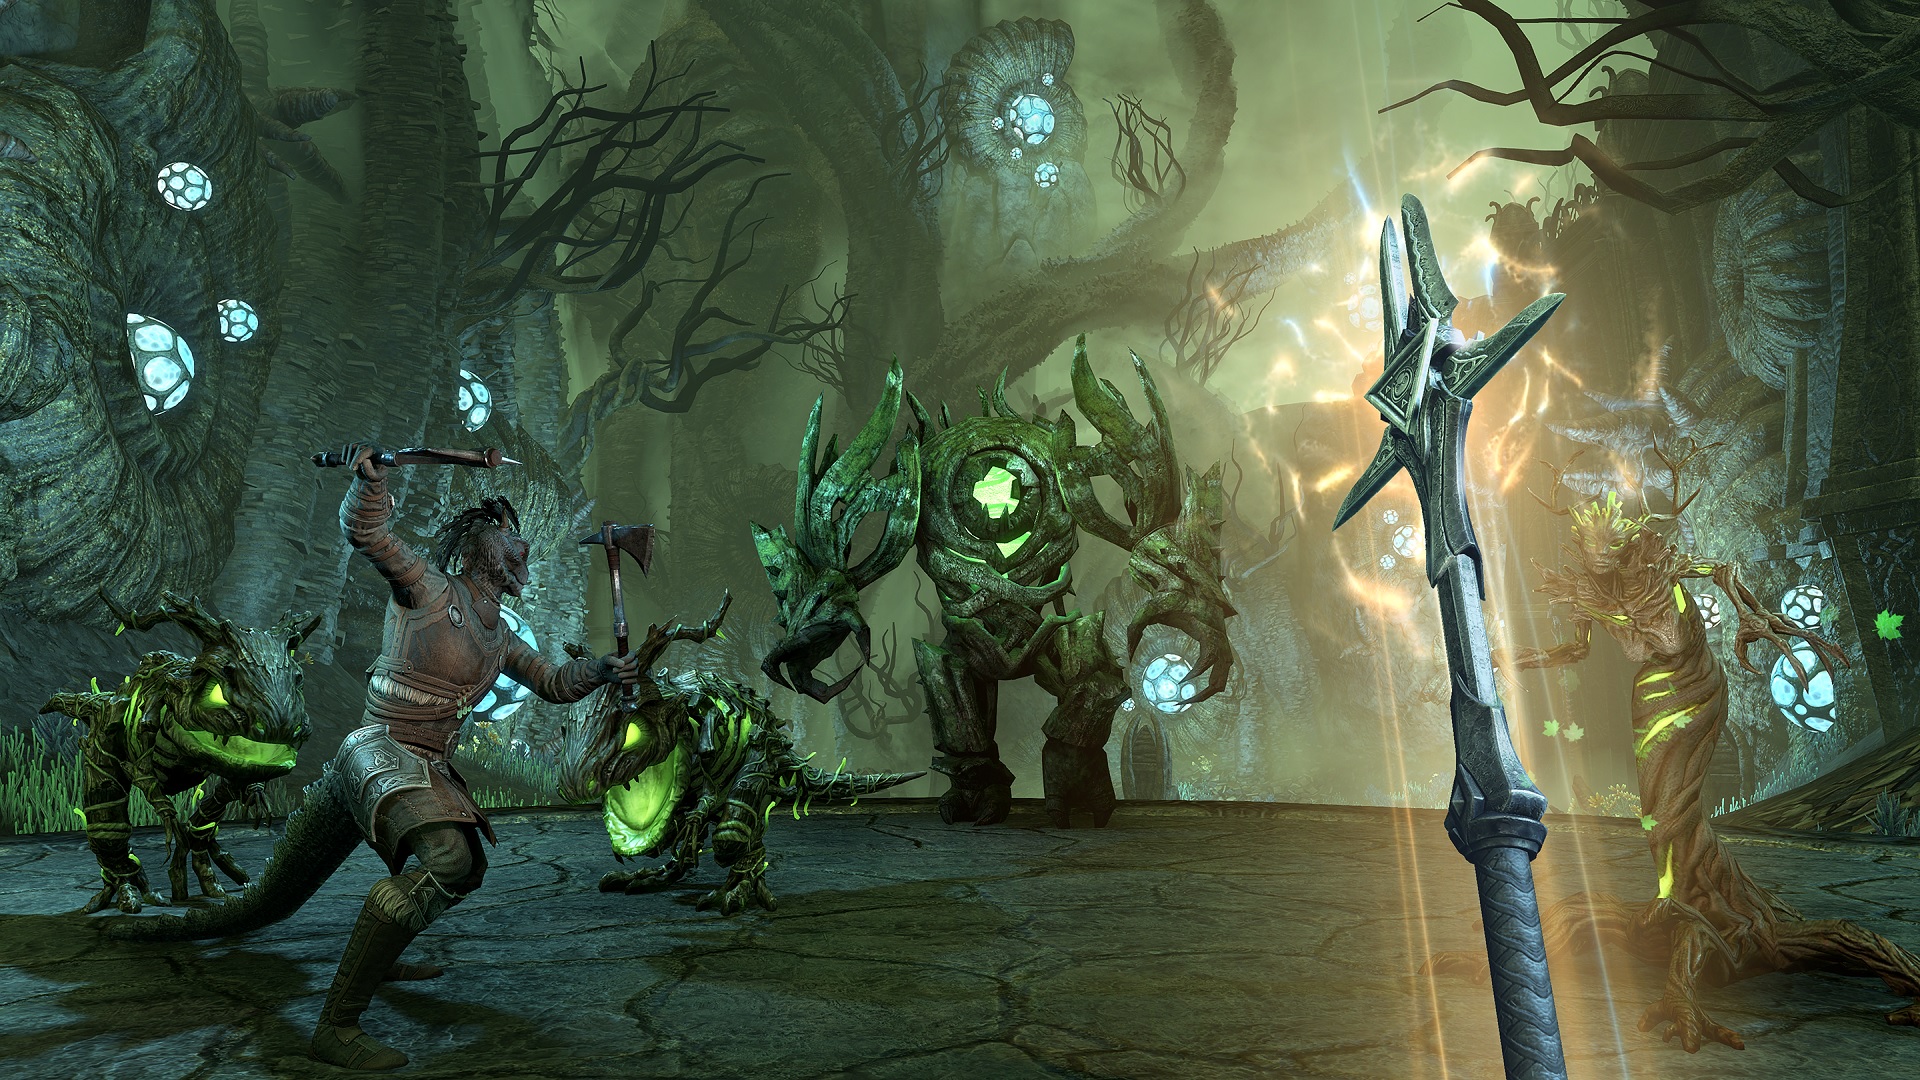 The Elder Scrolls Online Prepares for the Endless Archive By